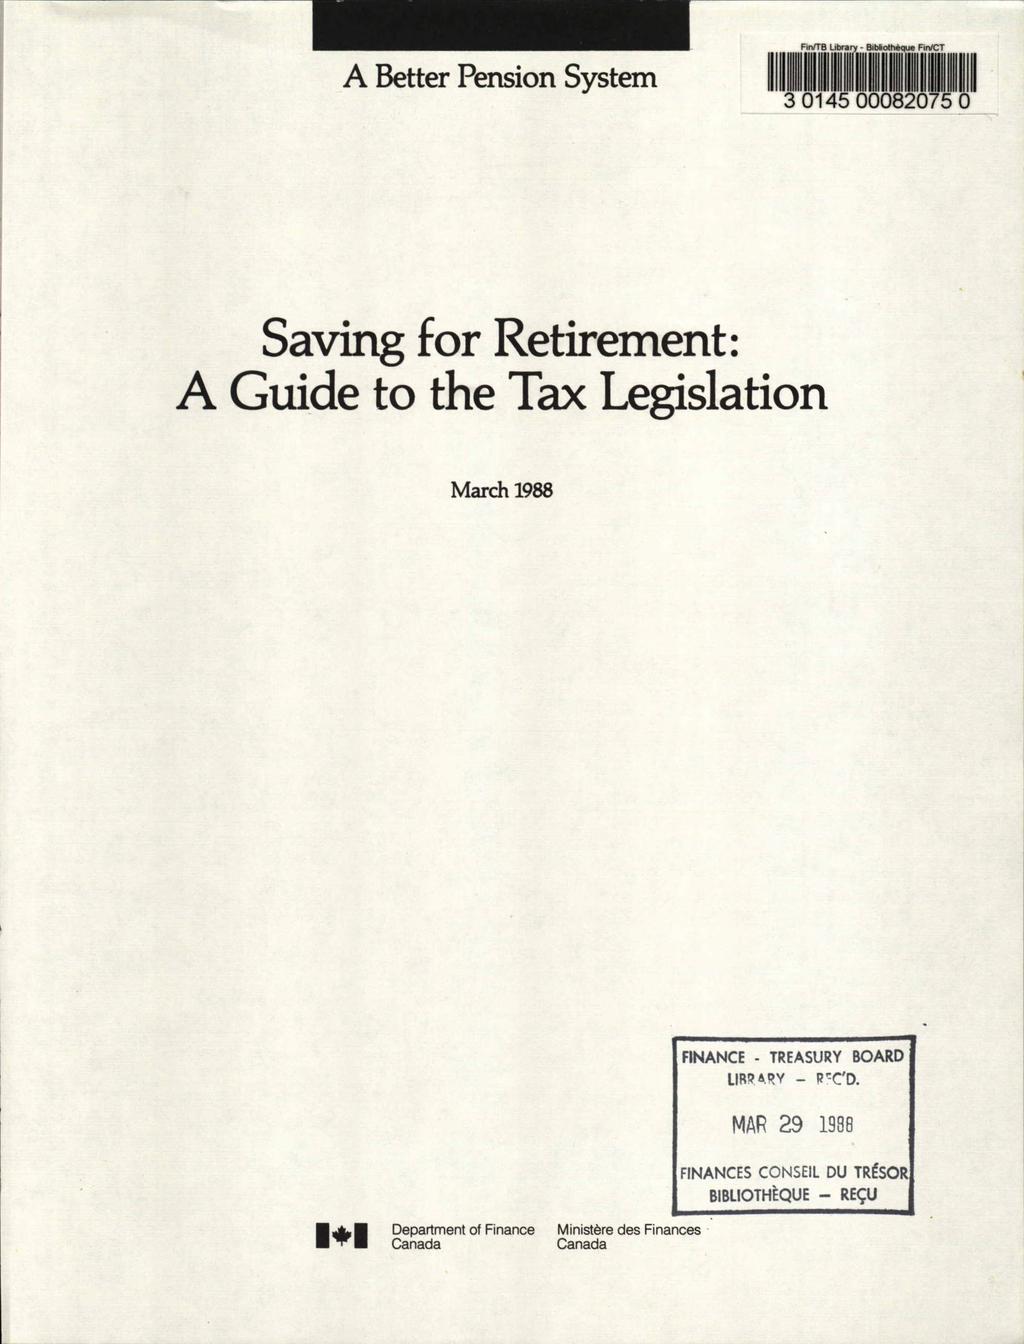 A Better Pension System 11 #1[1:14b5r111111 FOR Saving for Retirement: A Guide to the Tax Legislation March 1988 FINANCE - TREASURY